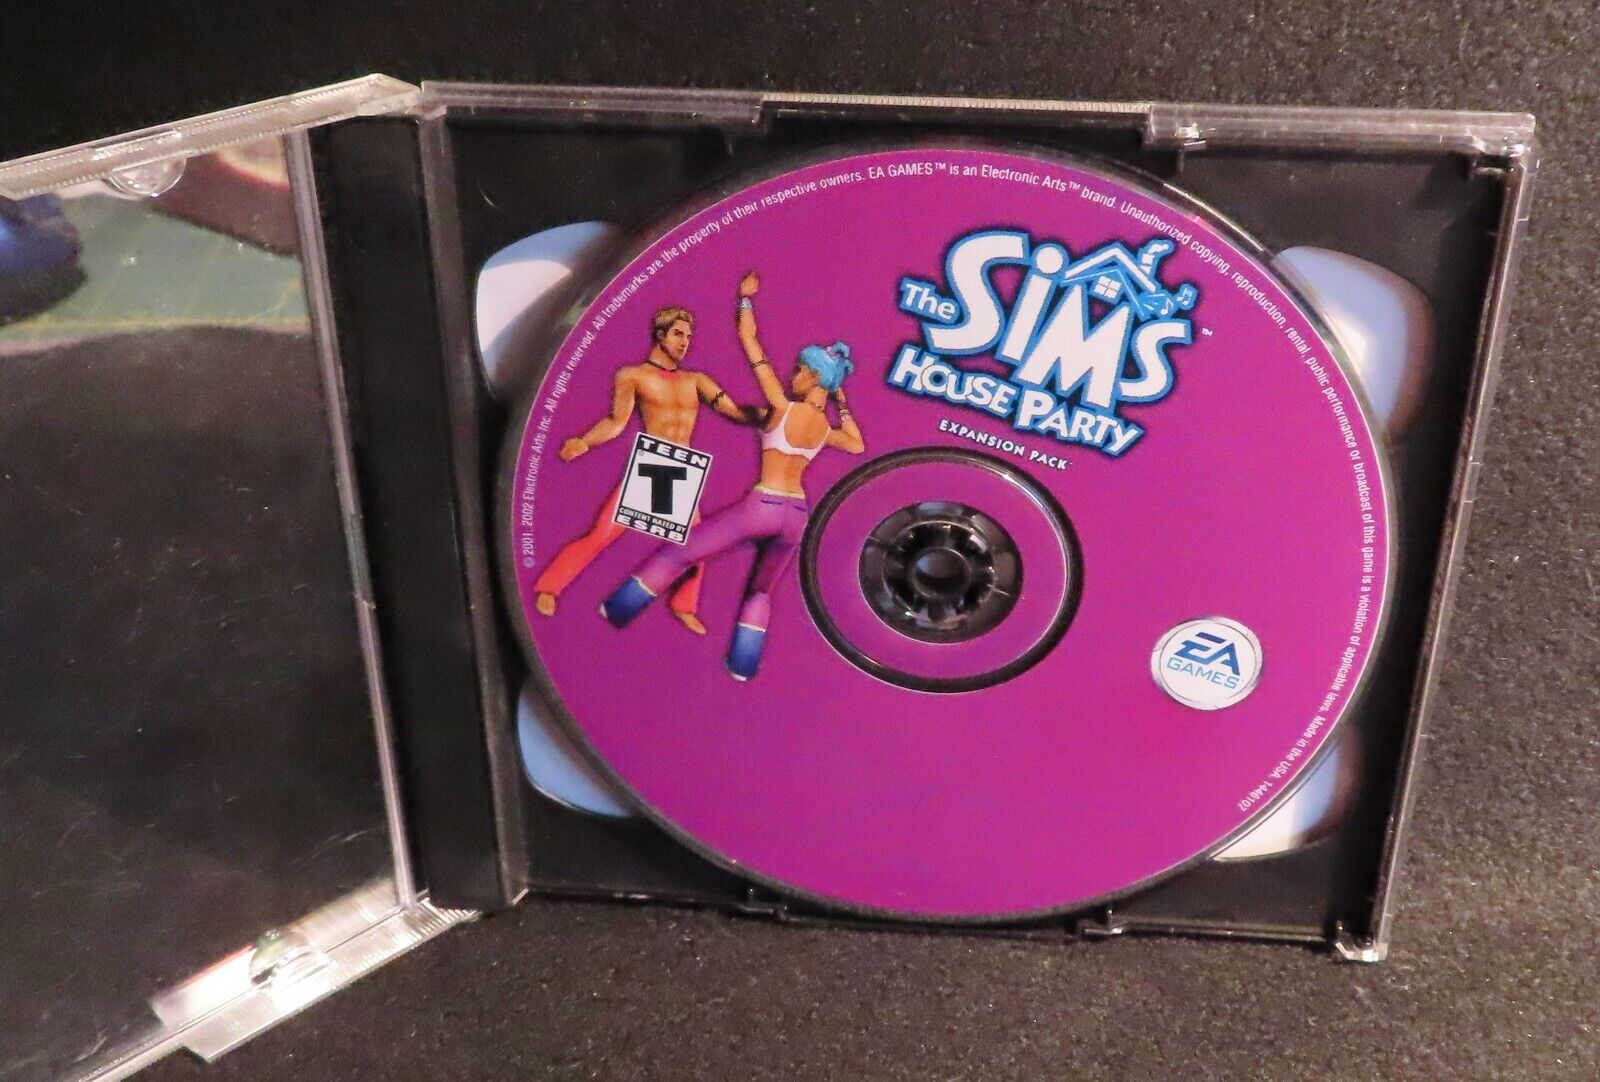 THE SIMS: HOUSE PARTY EXPANSION PACK - WINDOWS PC CD 2002 AS IS 3799